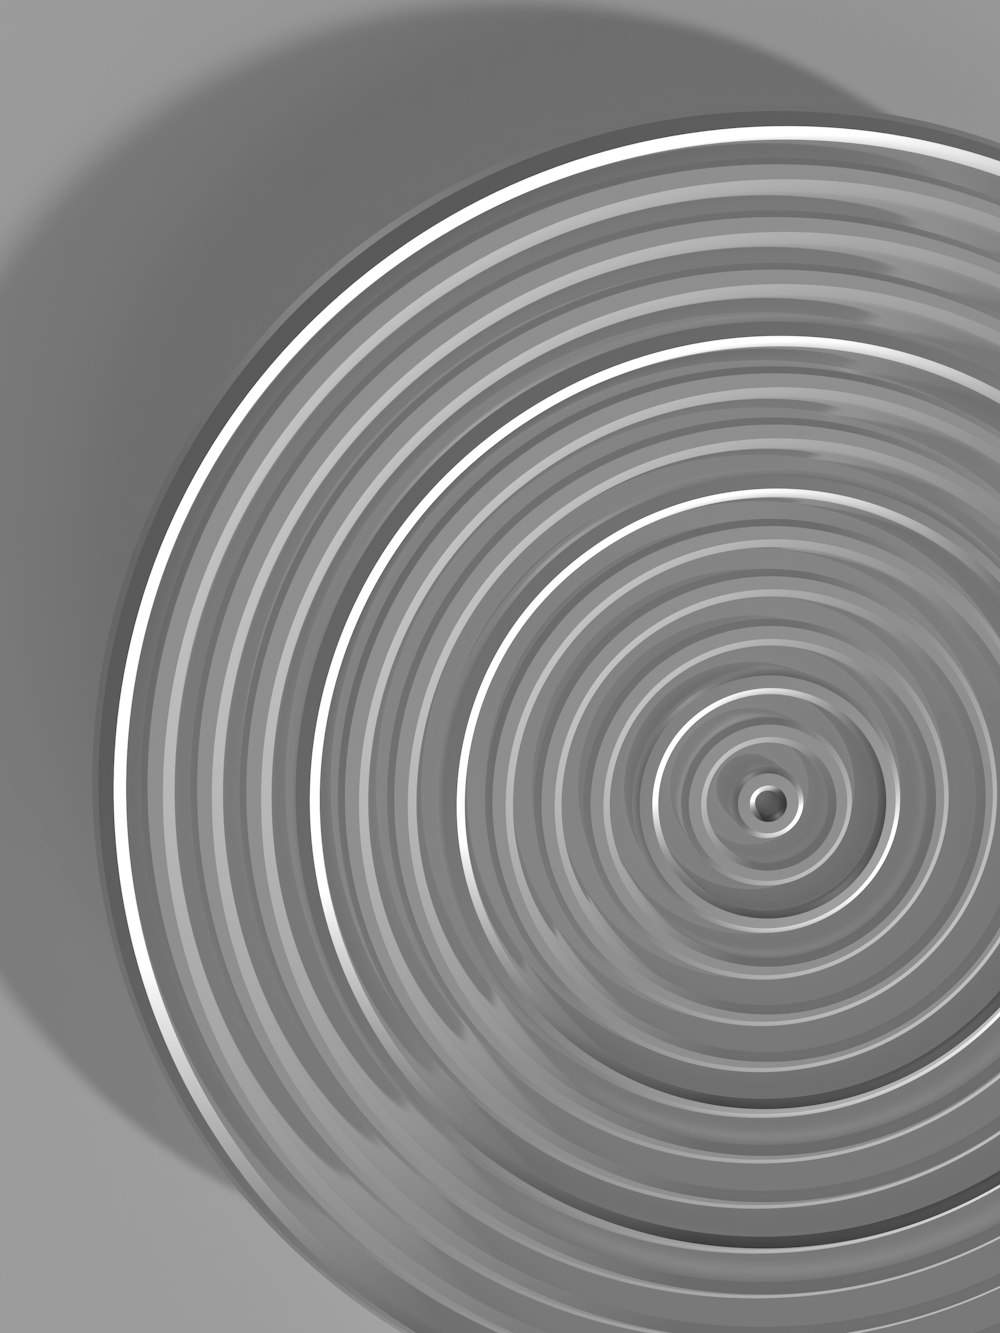 a circular object is shown in the middle of the image